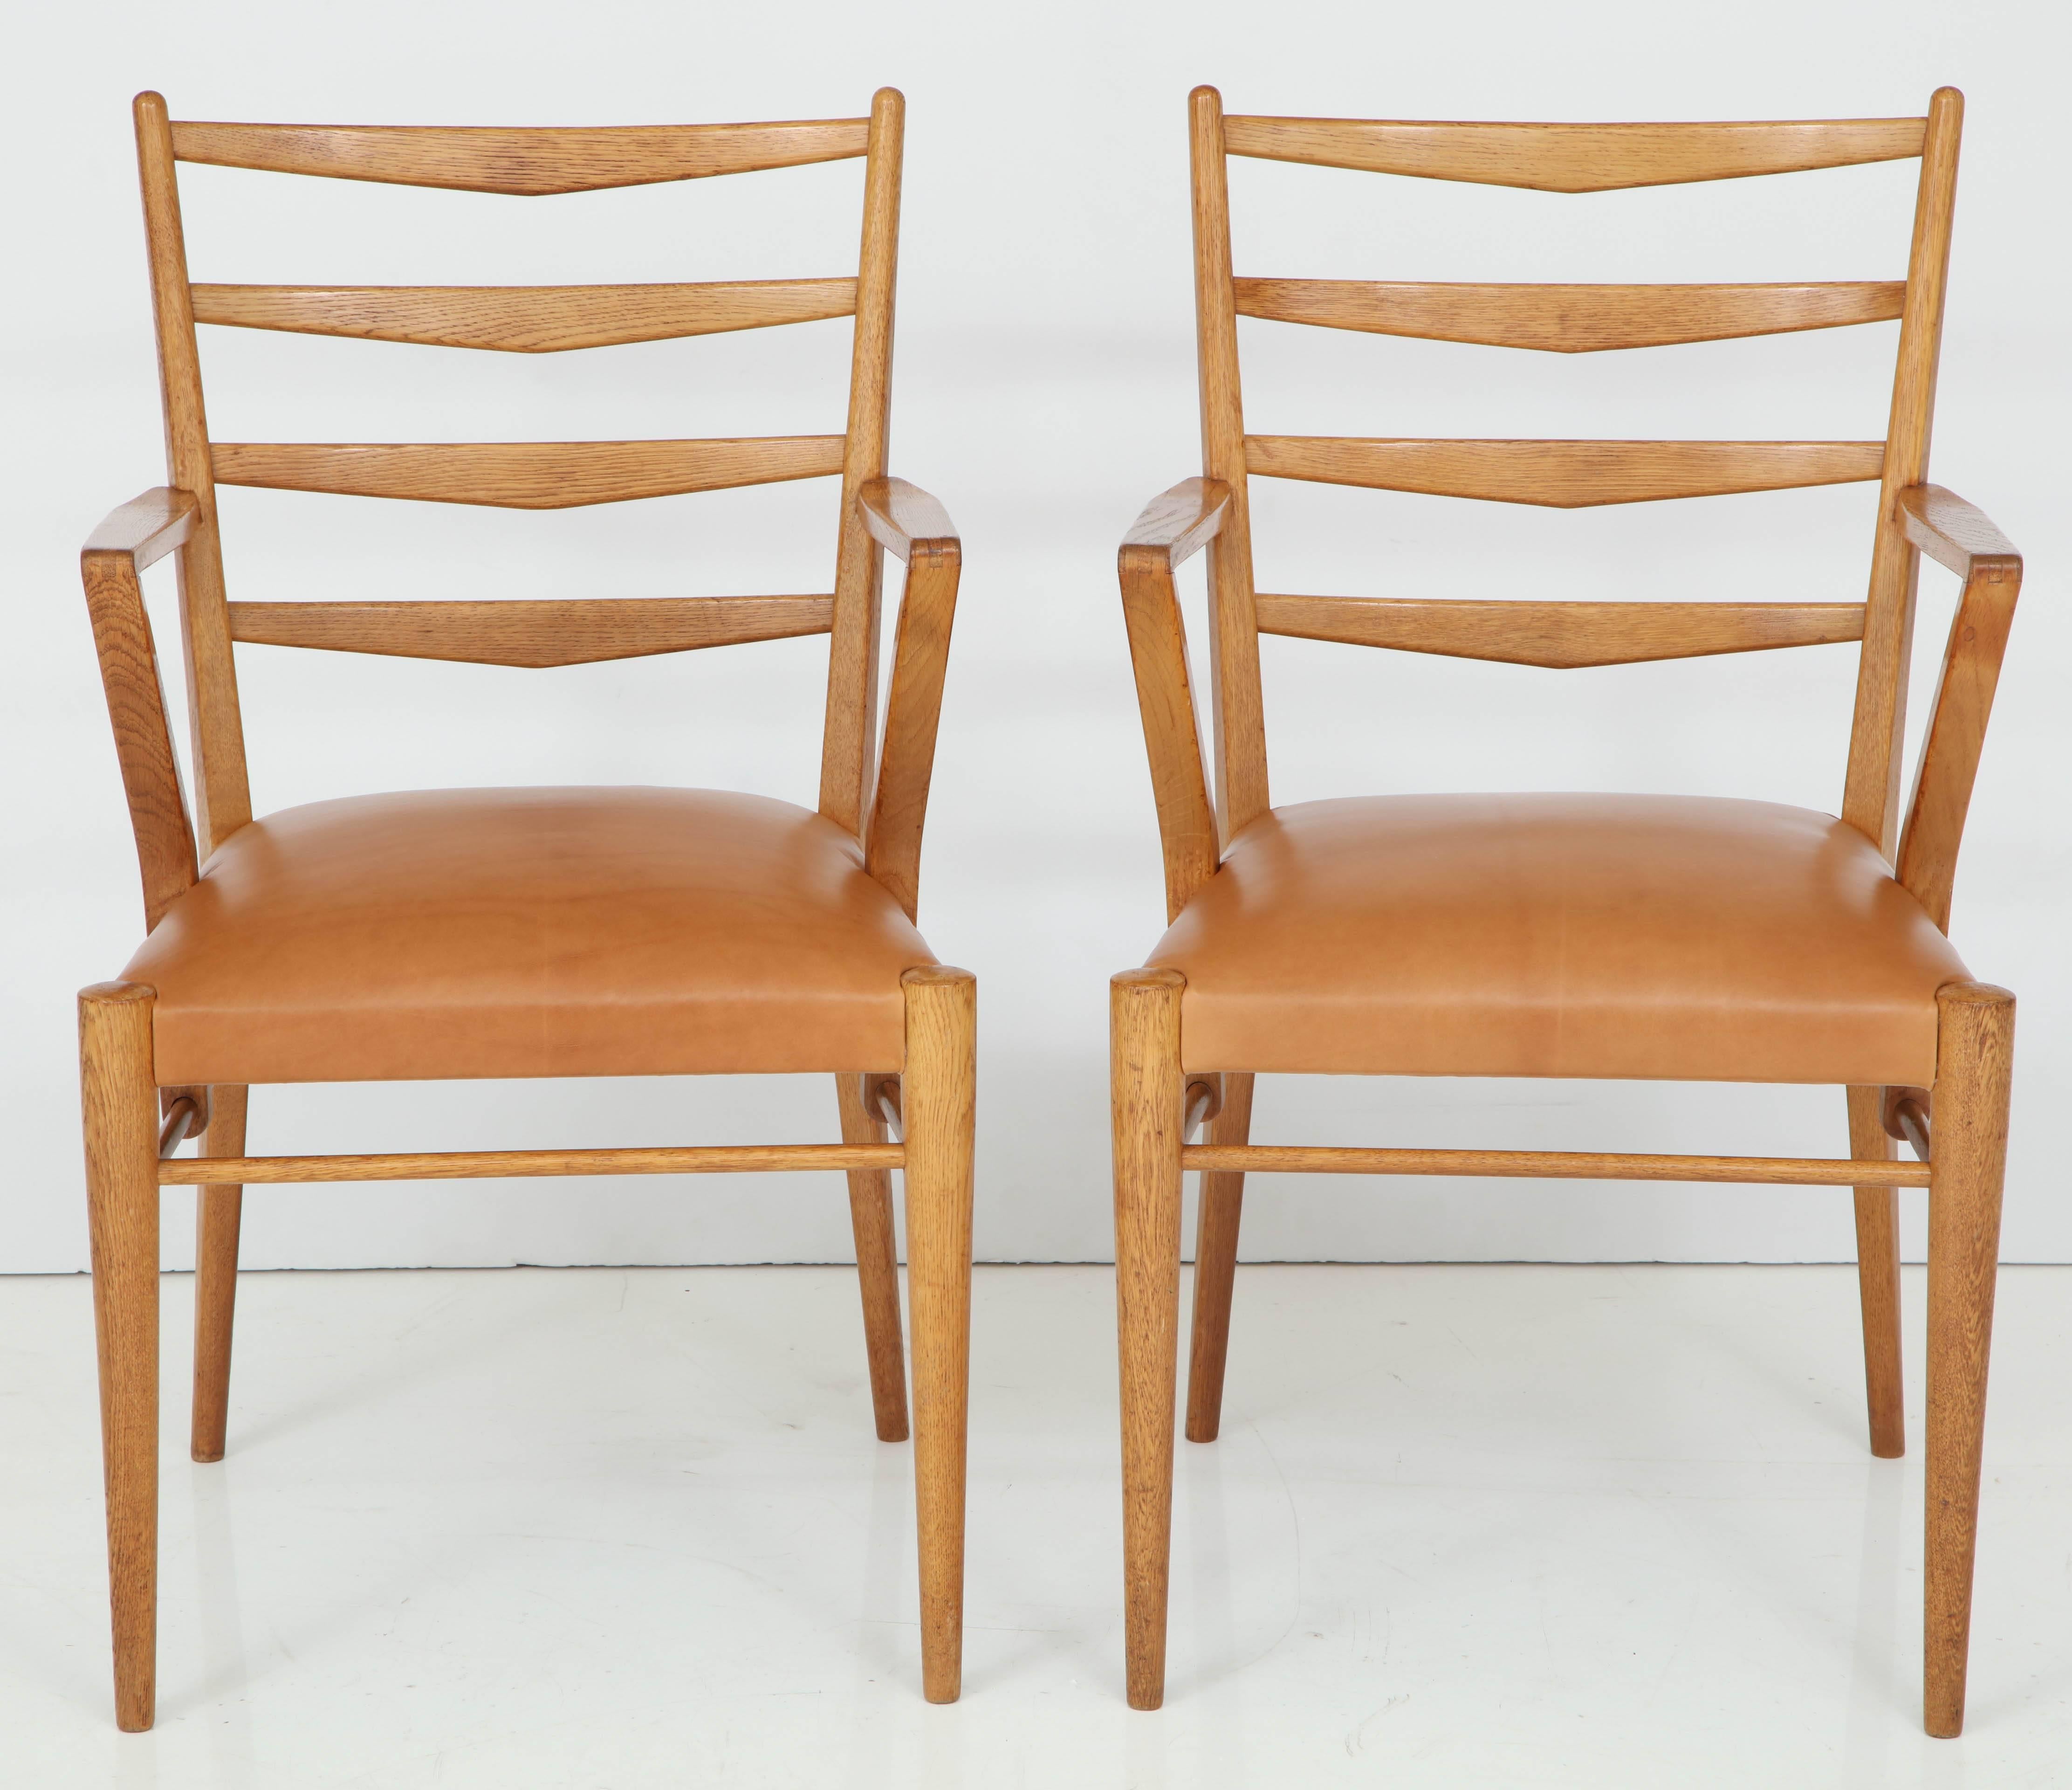 A pair of Dutch oak and leather open armchairs, circa 1950s, designed by Cees Braakman, each with ladder backs, triangular cutback armrests, an upholstered seat raised on circular turned and tapered legs.